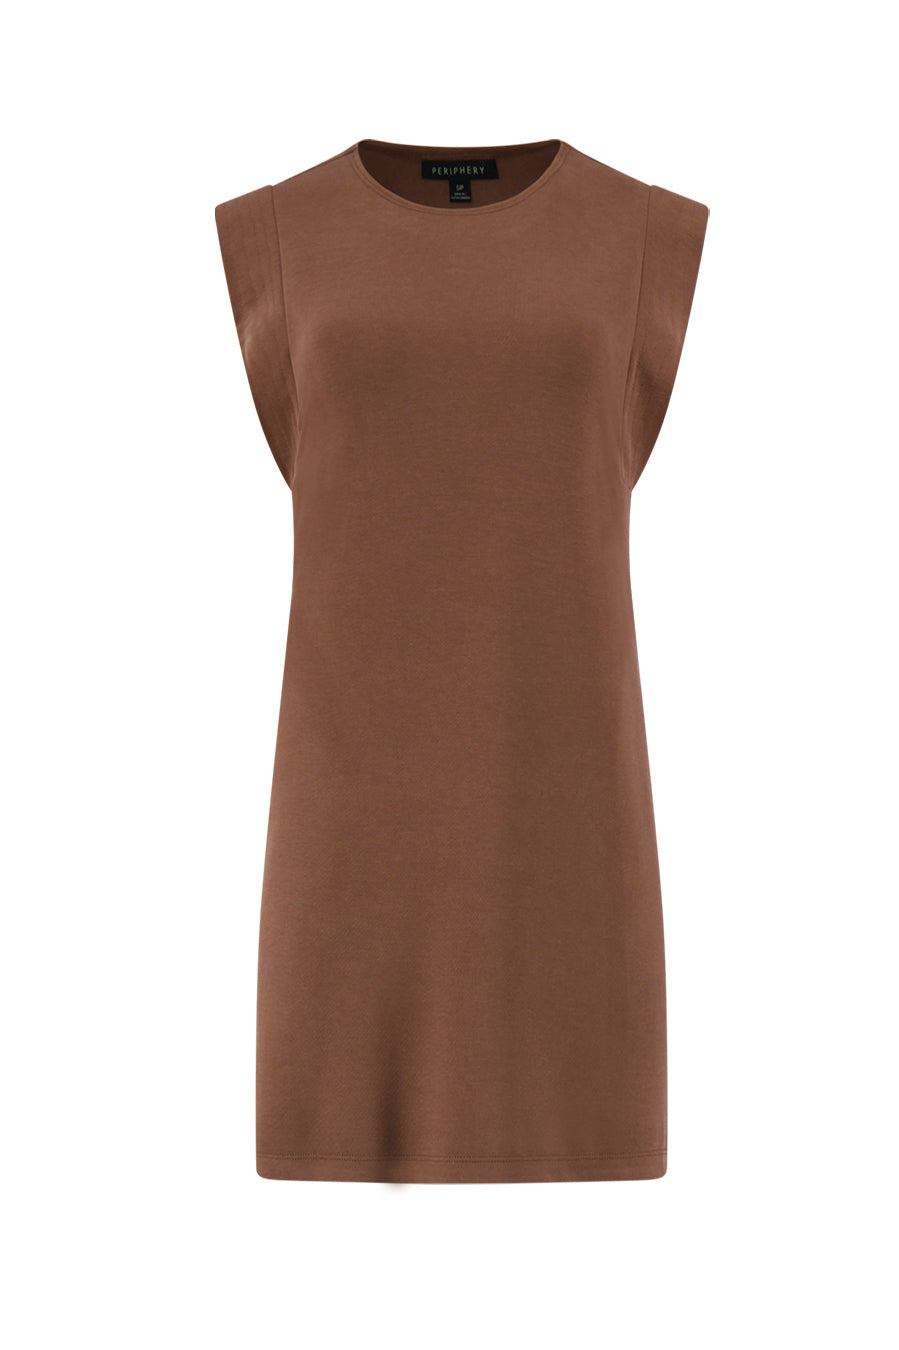 Dignity Dress in Cocoa - PERIPHERY